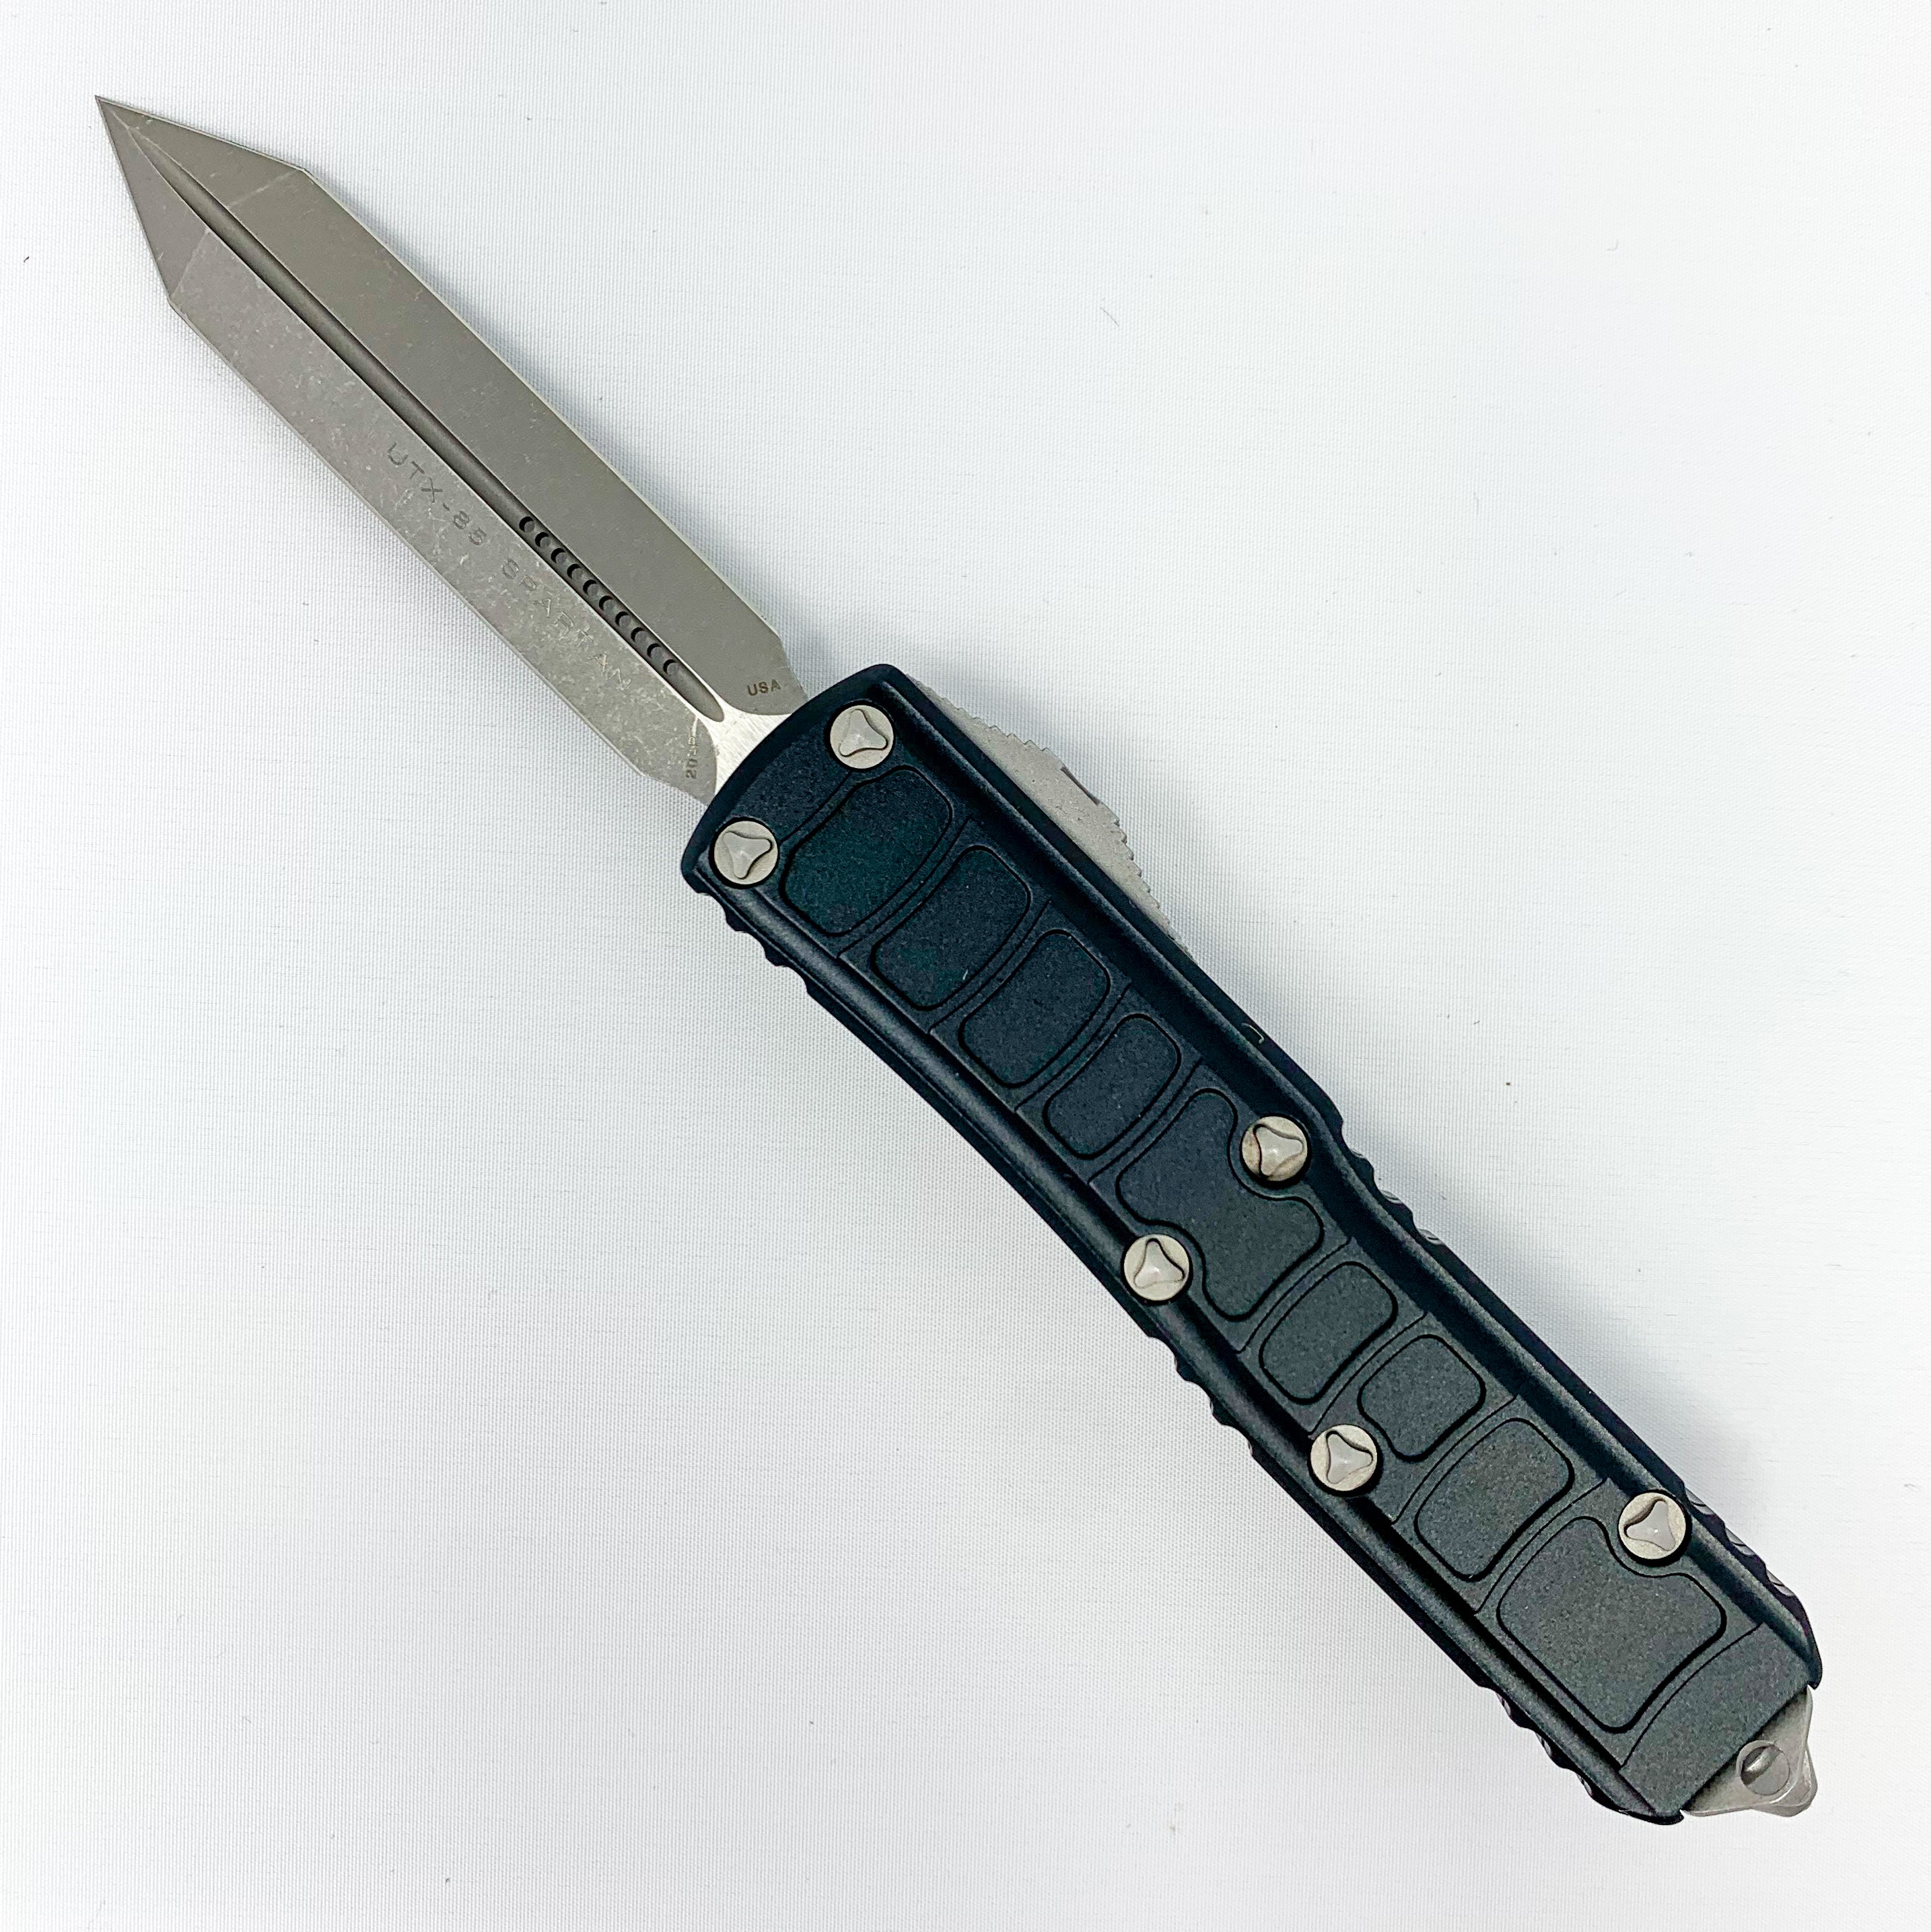 Microtech UTX-85 - Signature Series - Spartan Blade - Apocalyptic Finish - Black Chassis - 230II-10APS